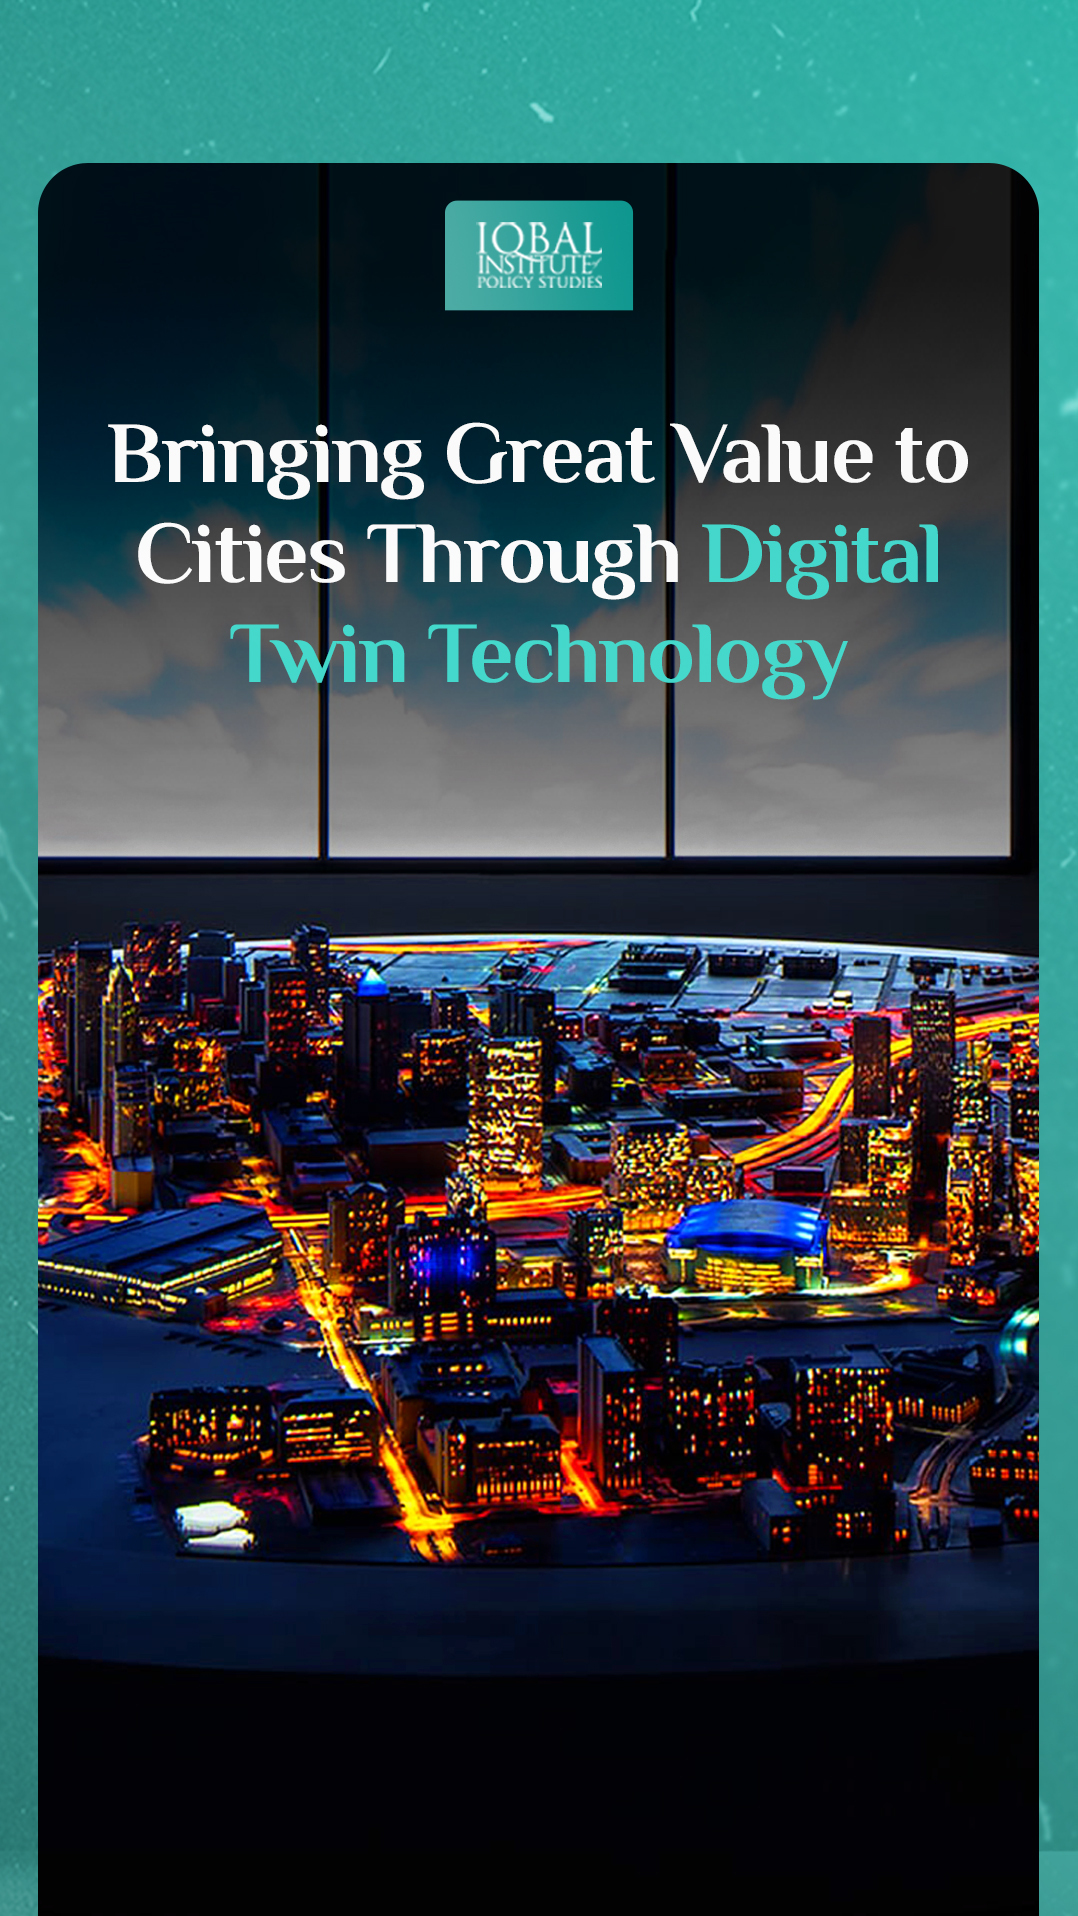 Bringing great value to cities through Digital Twin Technology